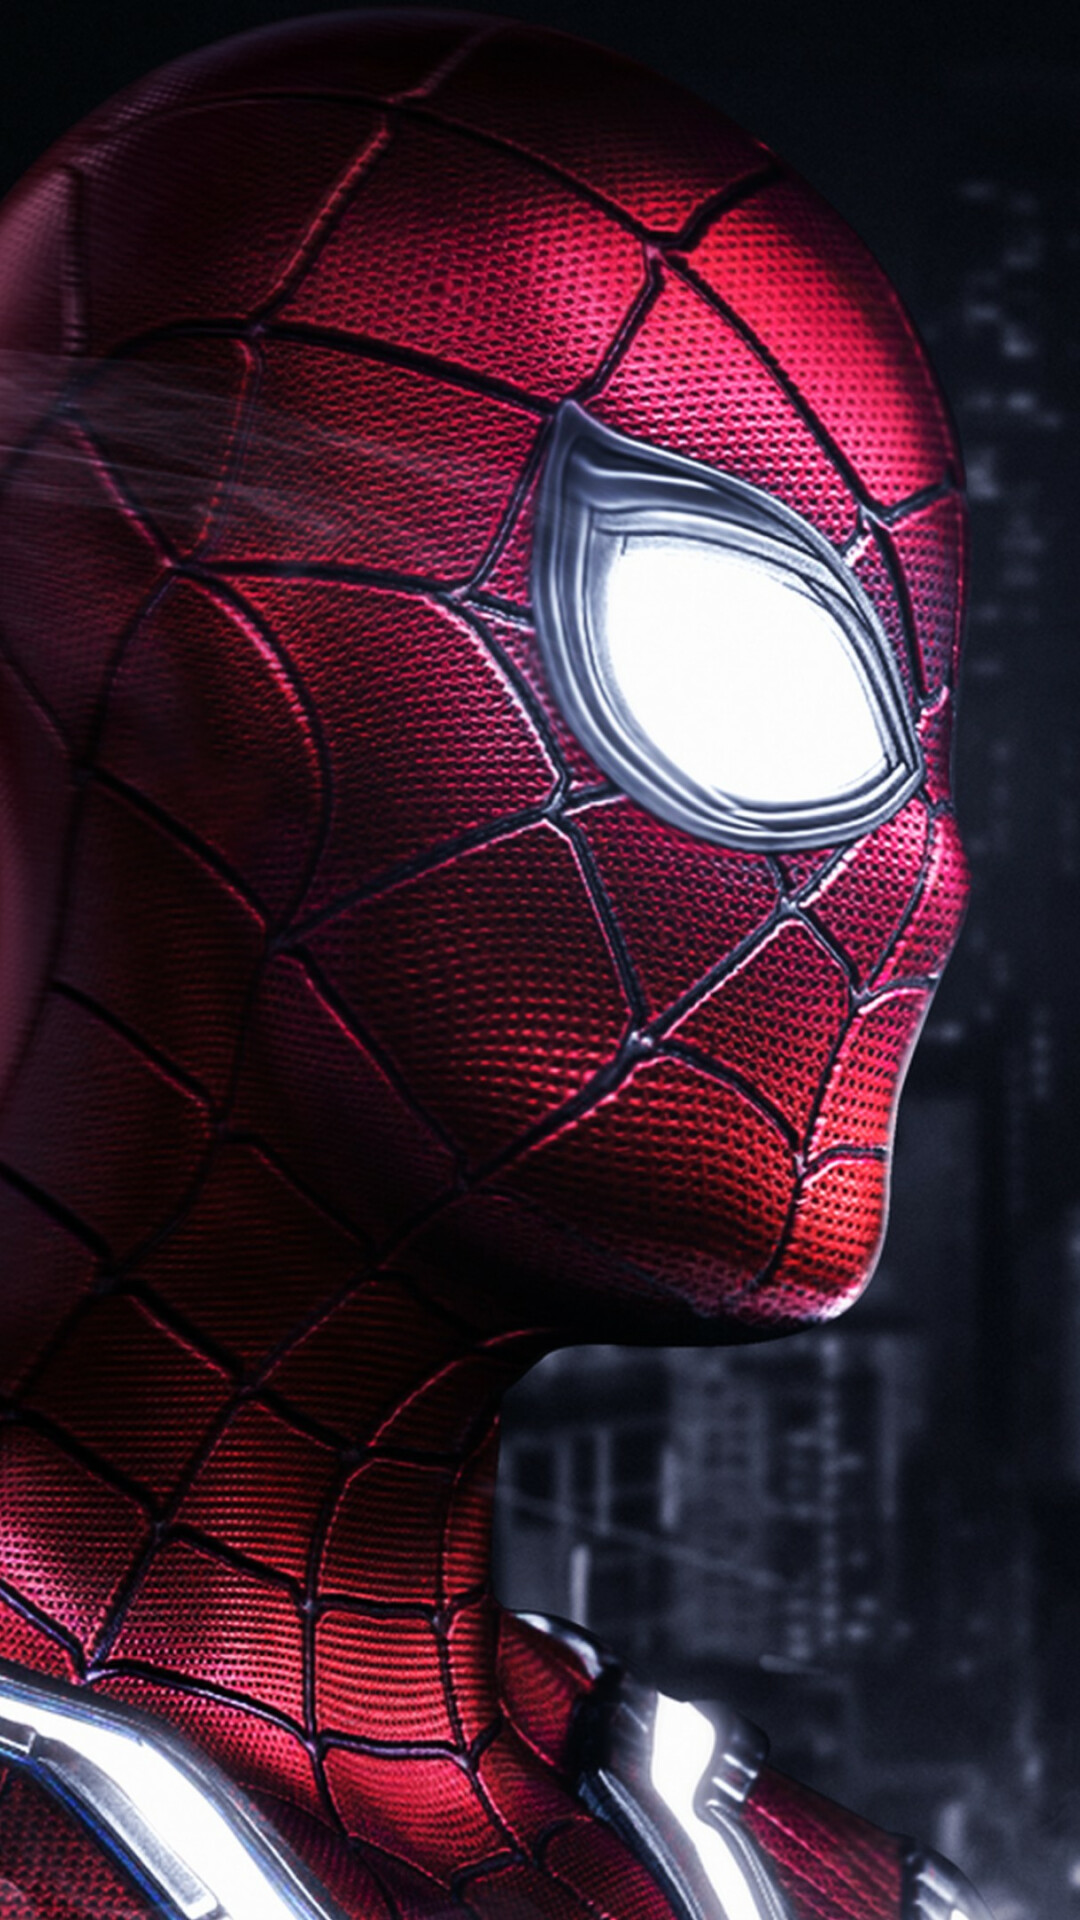 Marvel: Tom Holland as Peter Parker / Spider-Man, With great power comes great responsibility. 1080x1920 Full HD Wallpaper.